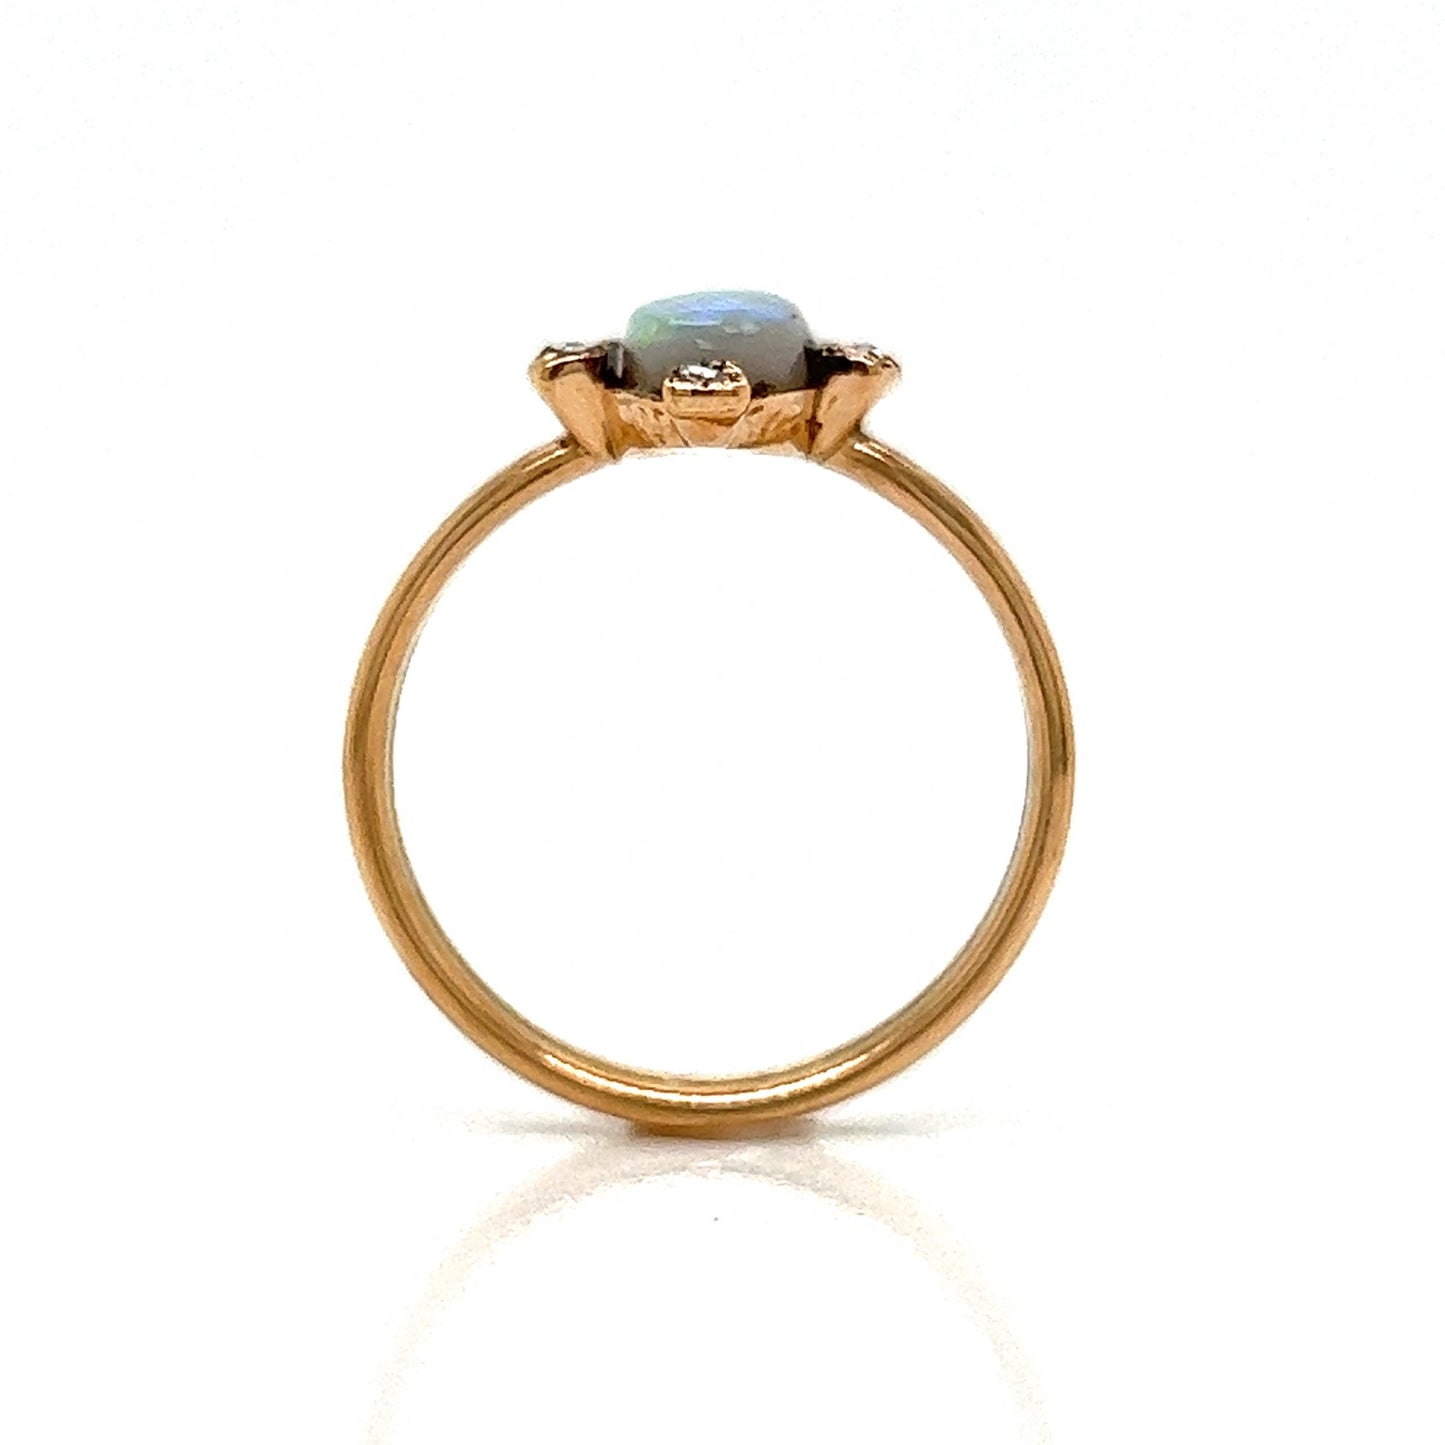 Victorian Oval Opal & Diamond Ring in 14k Yellow Gold